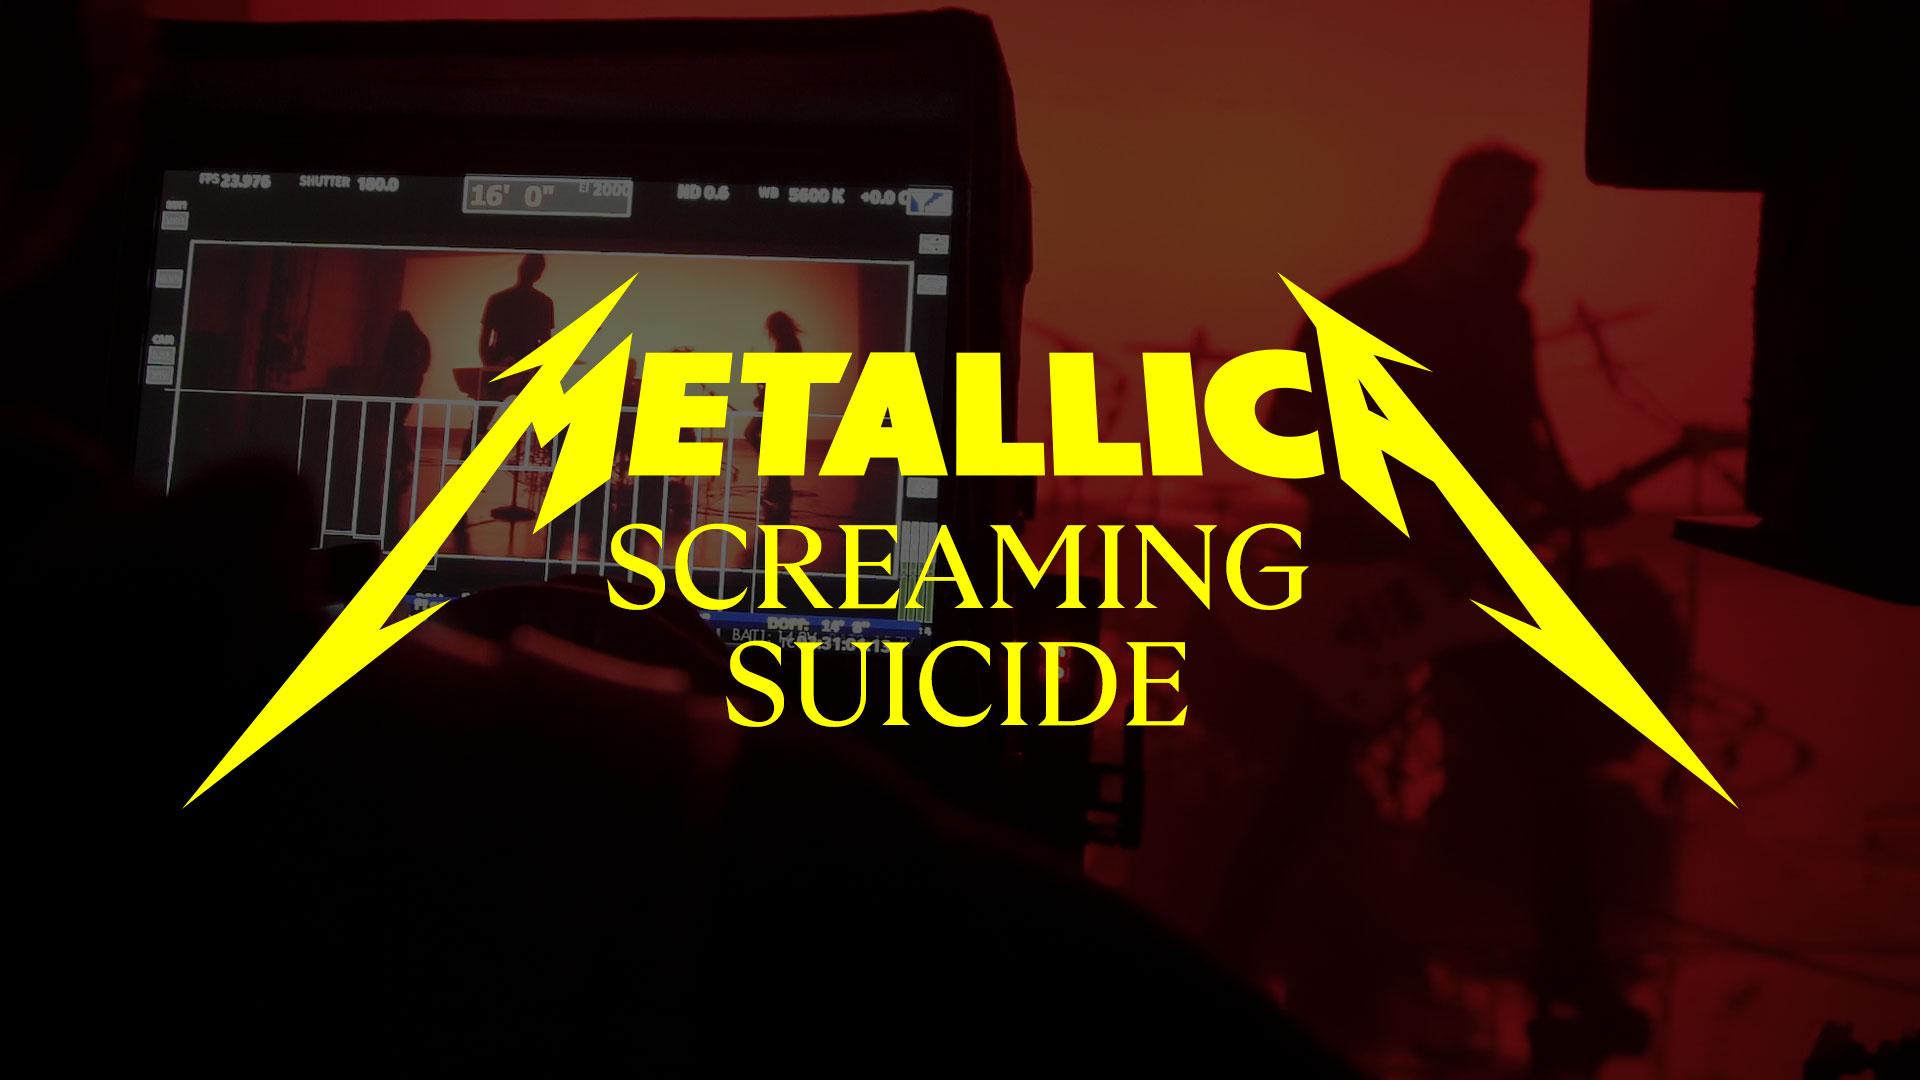 Go Behind the Video of the "Screaming Suicide" Music Video